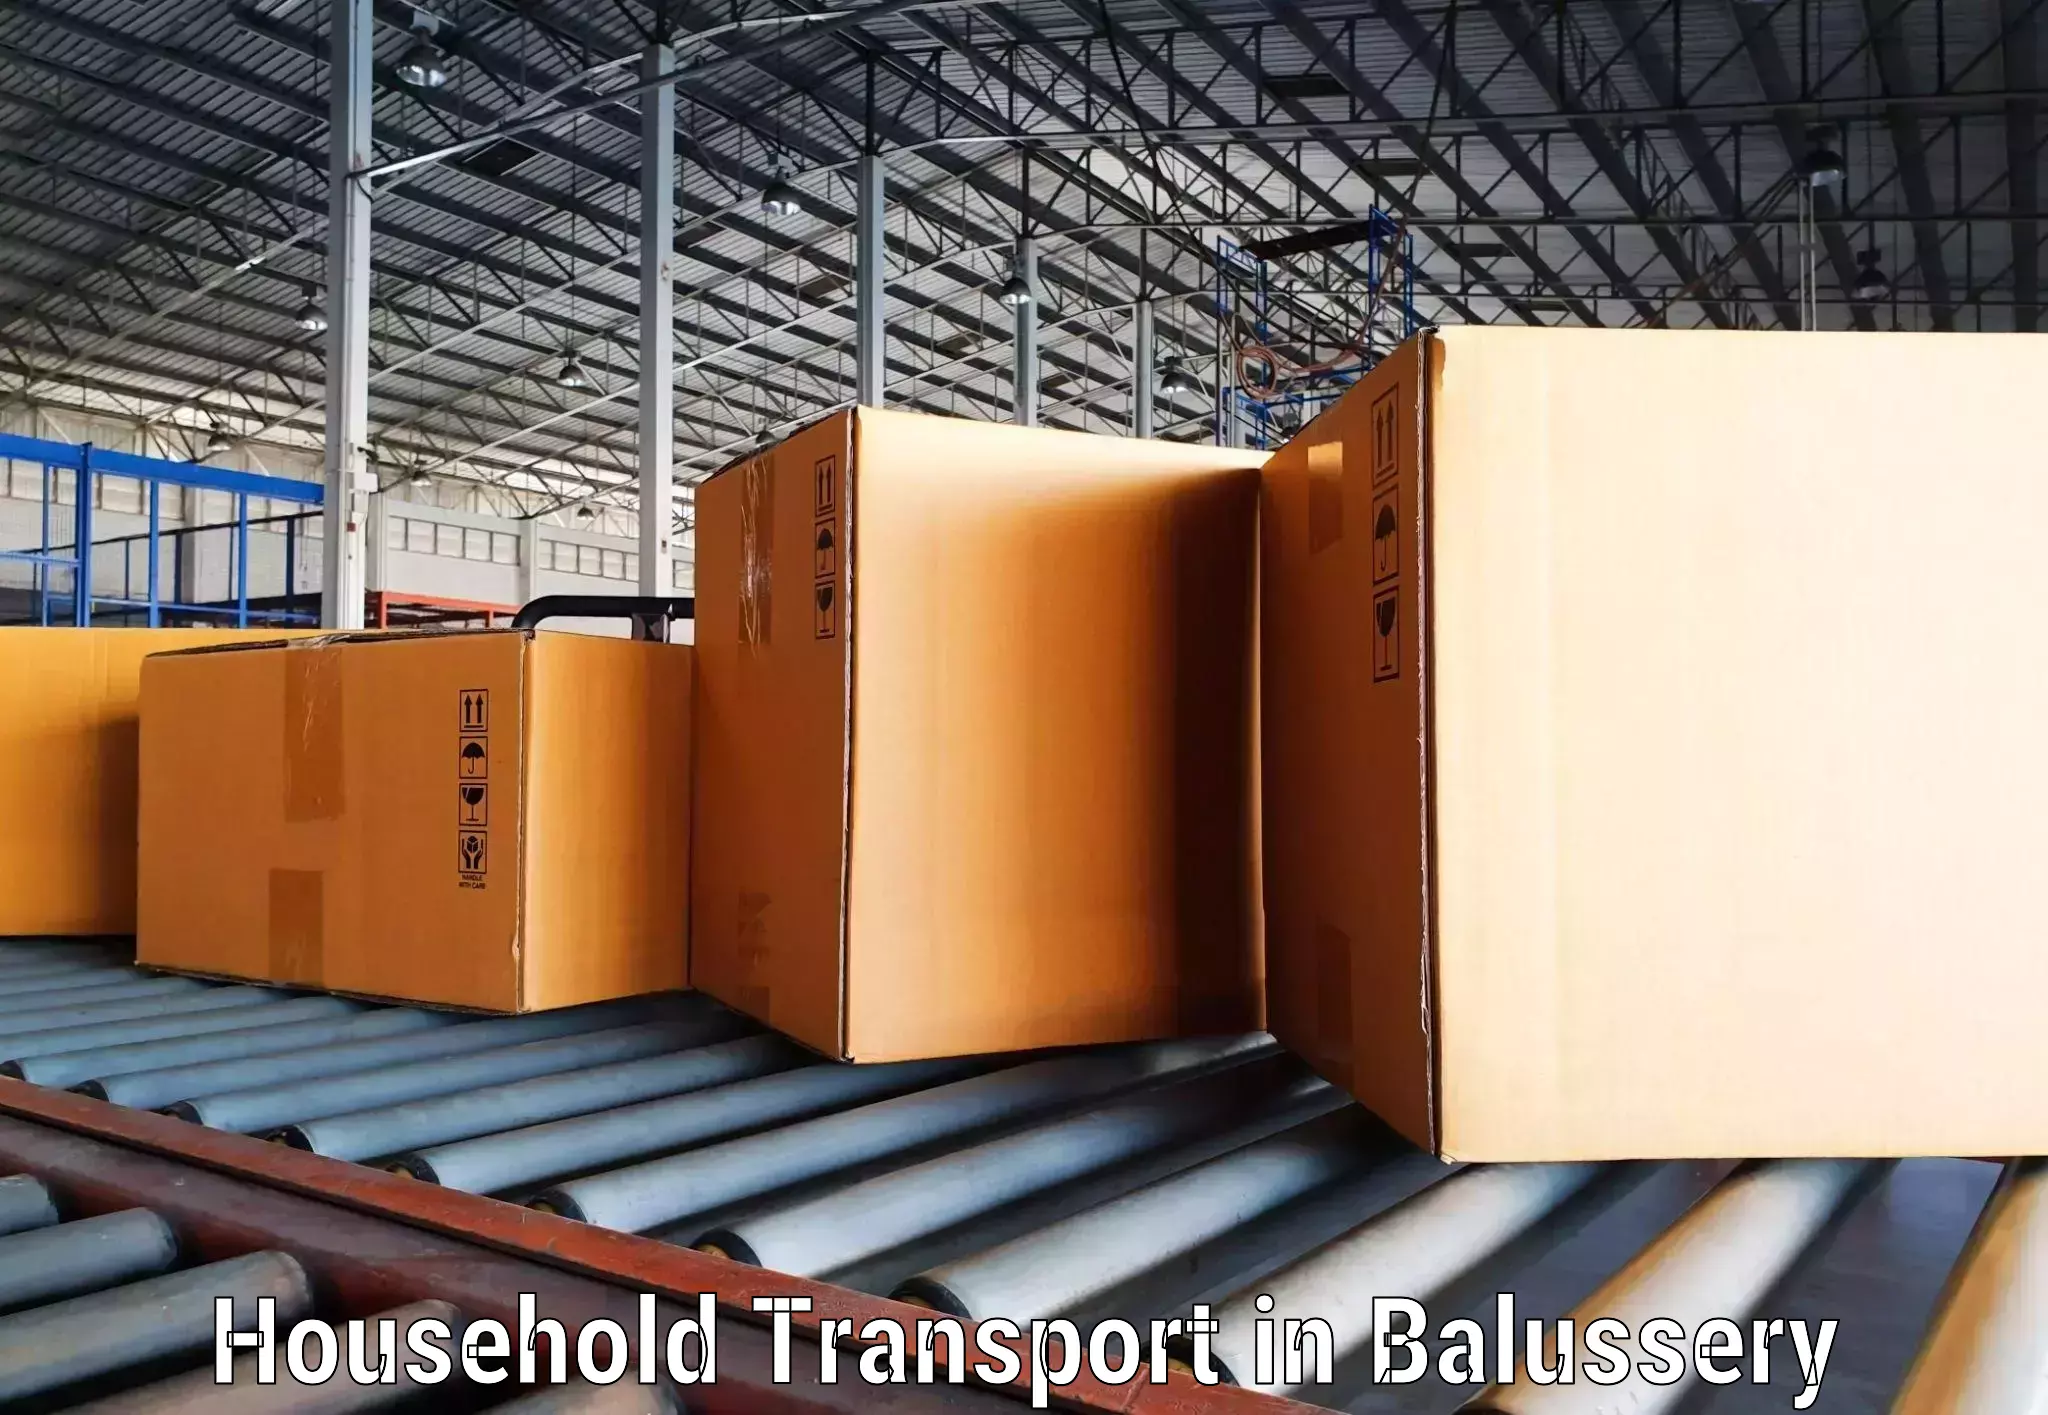 Household transport services in Balussery